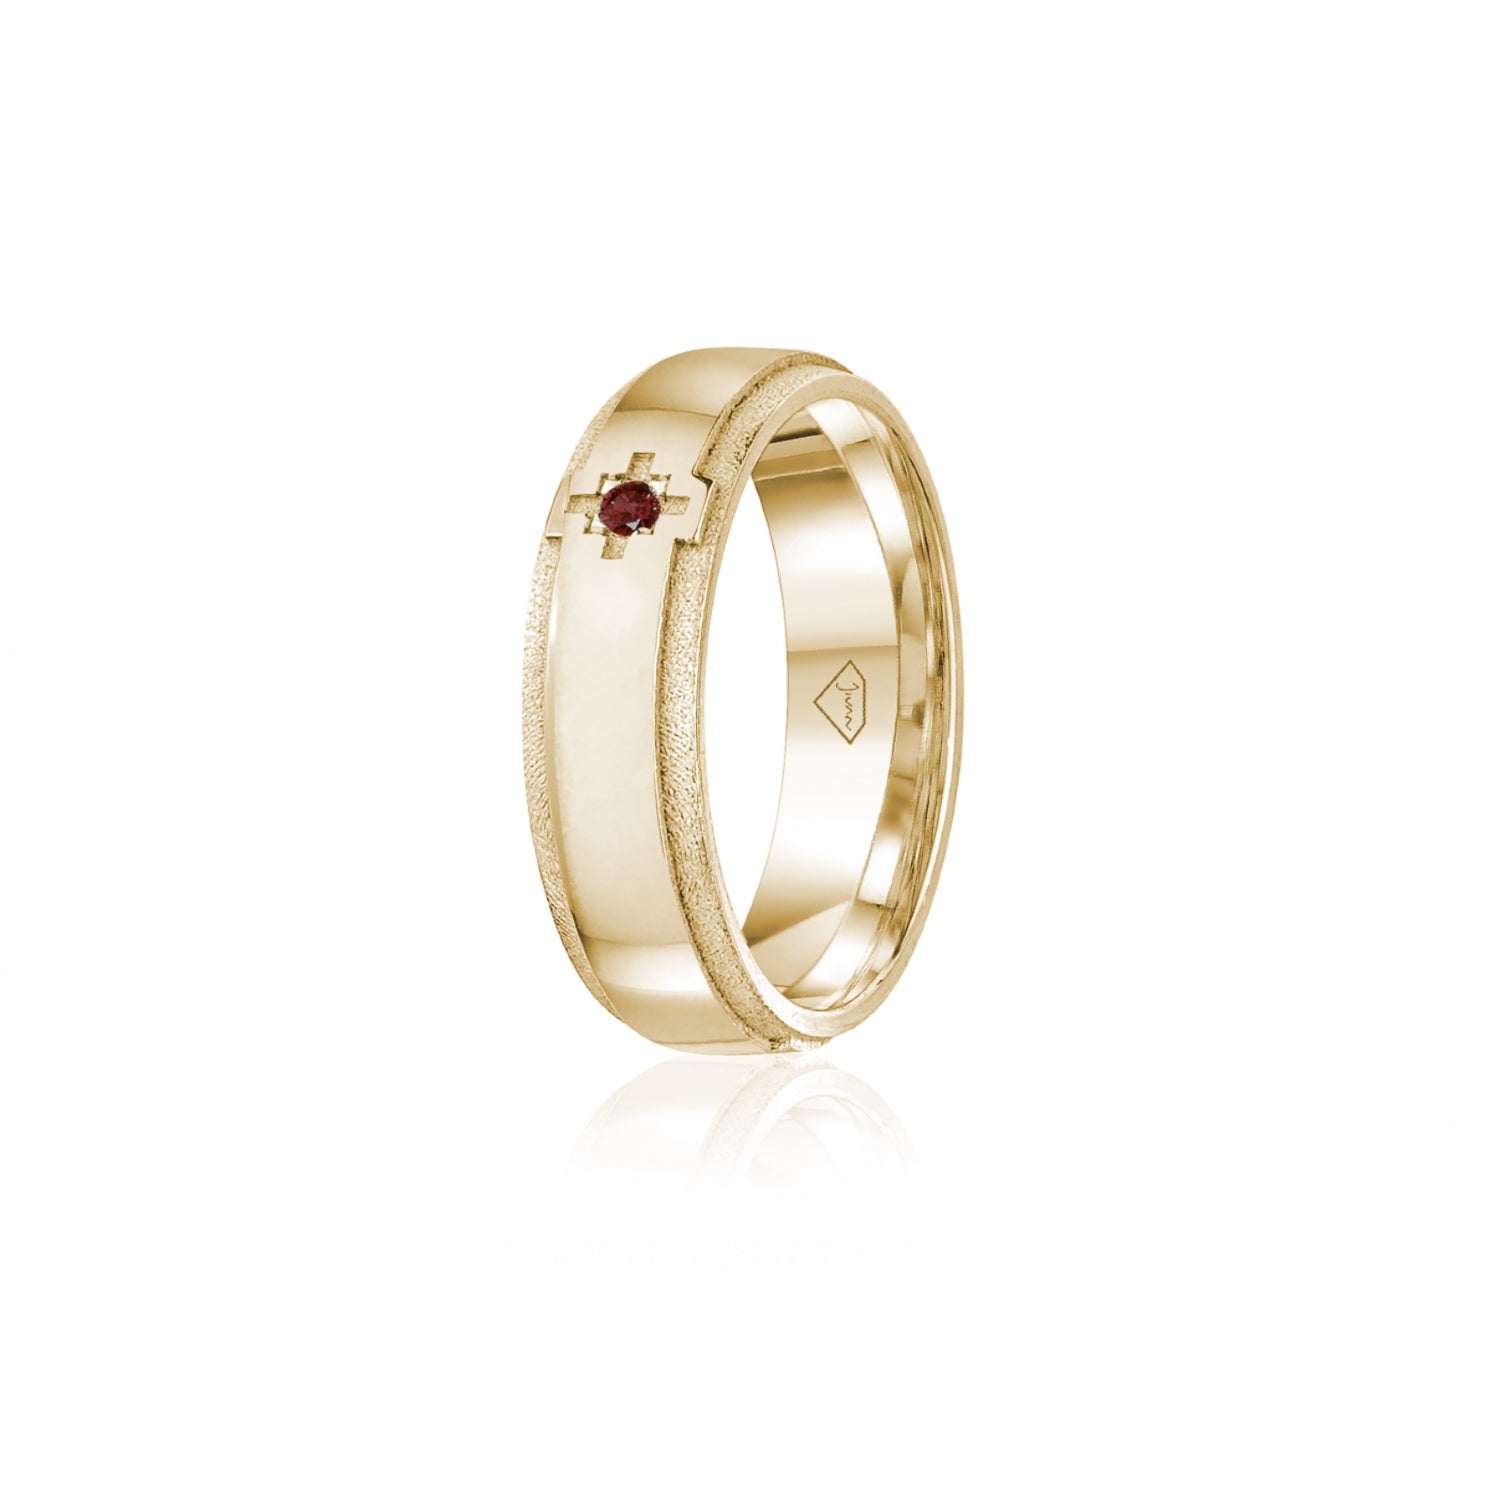 Ruby Accent Polished Finish Bevelled Edge 8-9 mm Wedding Ring in Yellow Gold